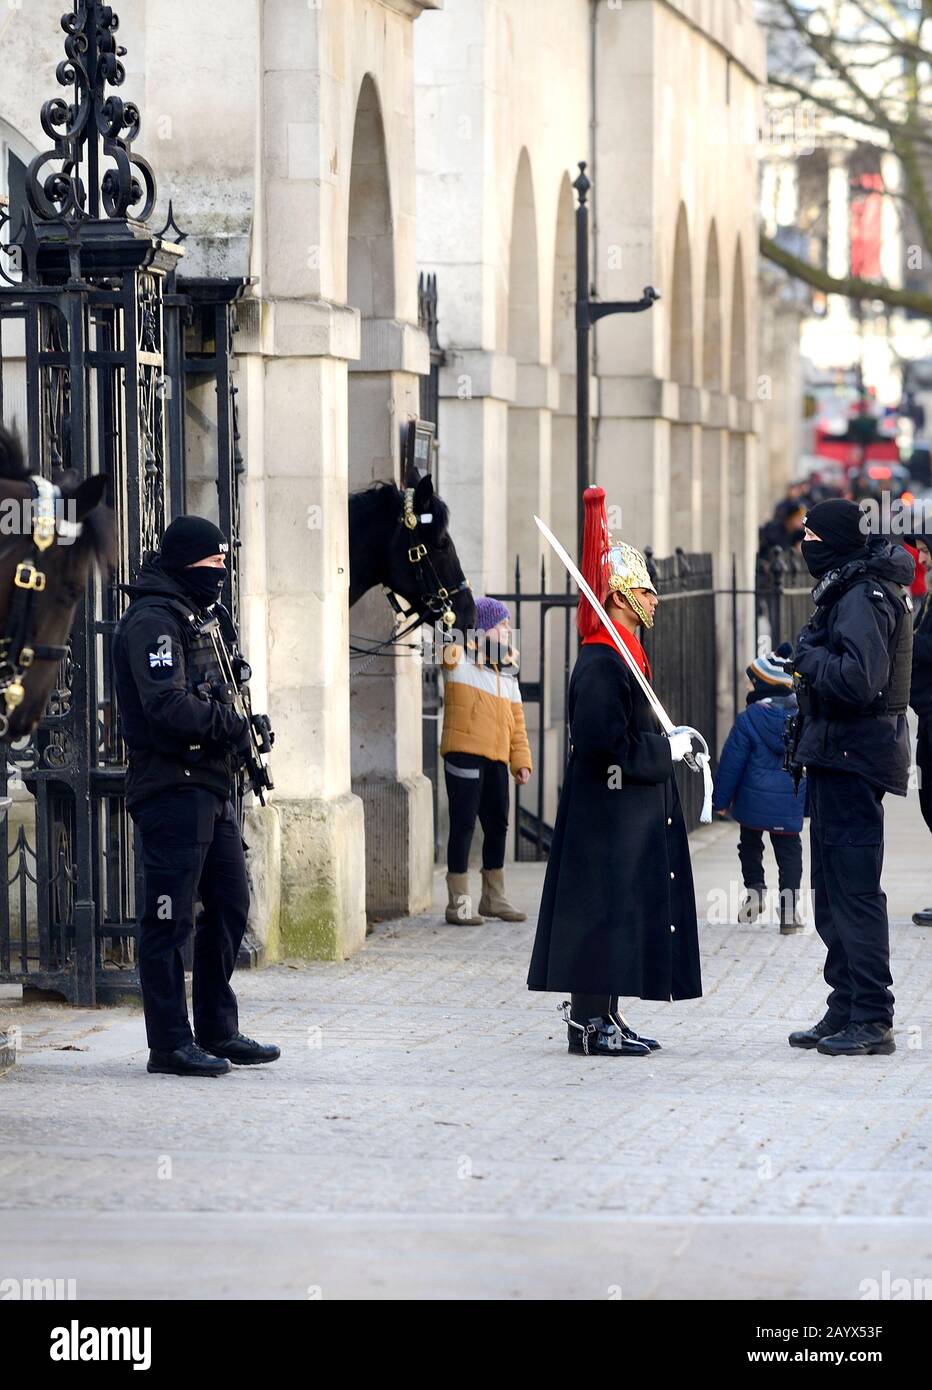 London, England, UK. Member of the Blues and Royals with armed police in Whitehall outside Horse Guards Parade Stock Photo